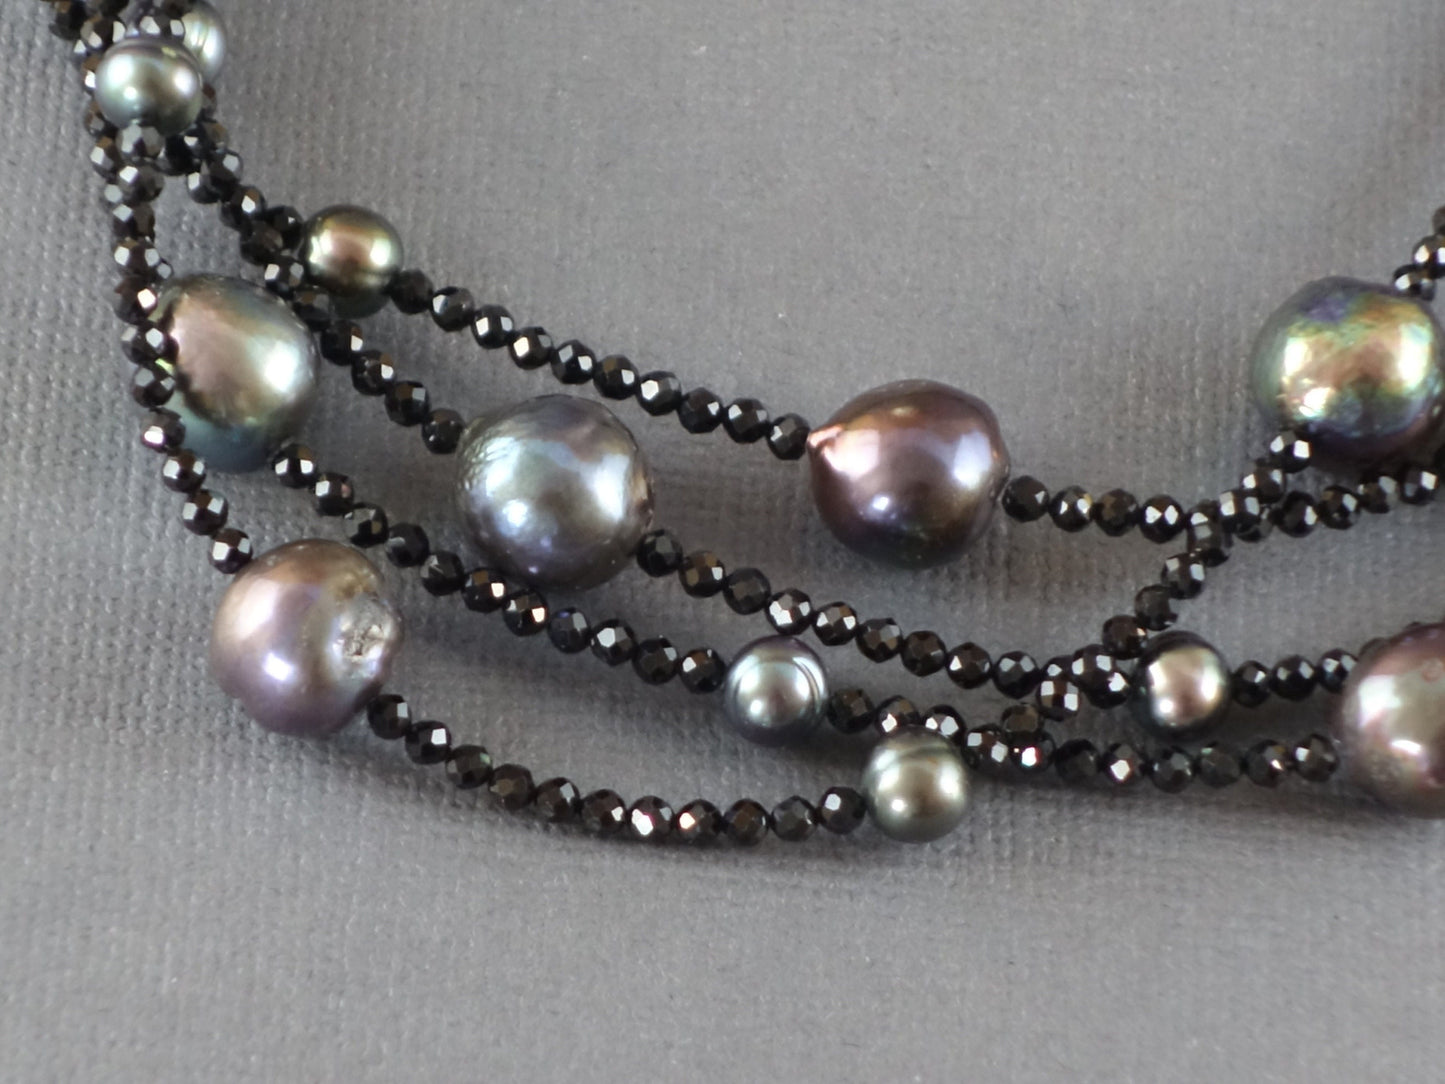 Long Pearl Necklace, Black Pearl Necklace, Black Spinel Necklace, Peacock Pearl Necklace,